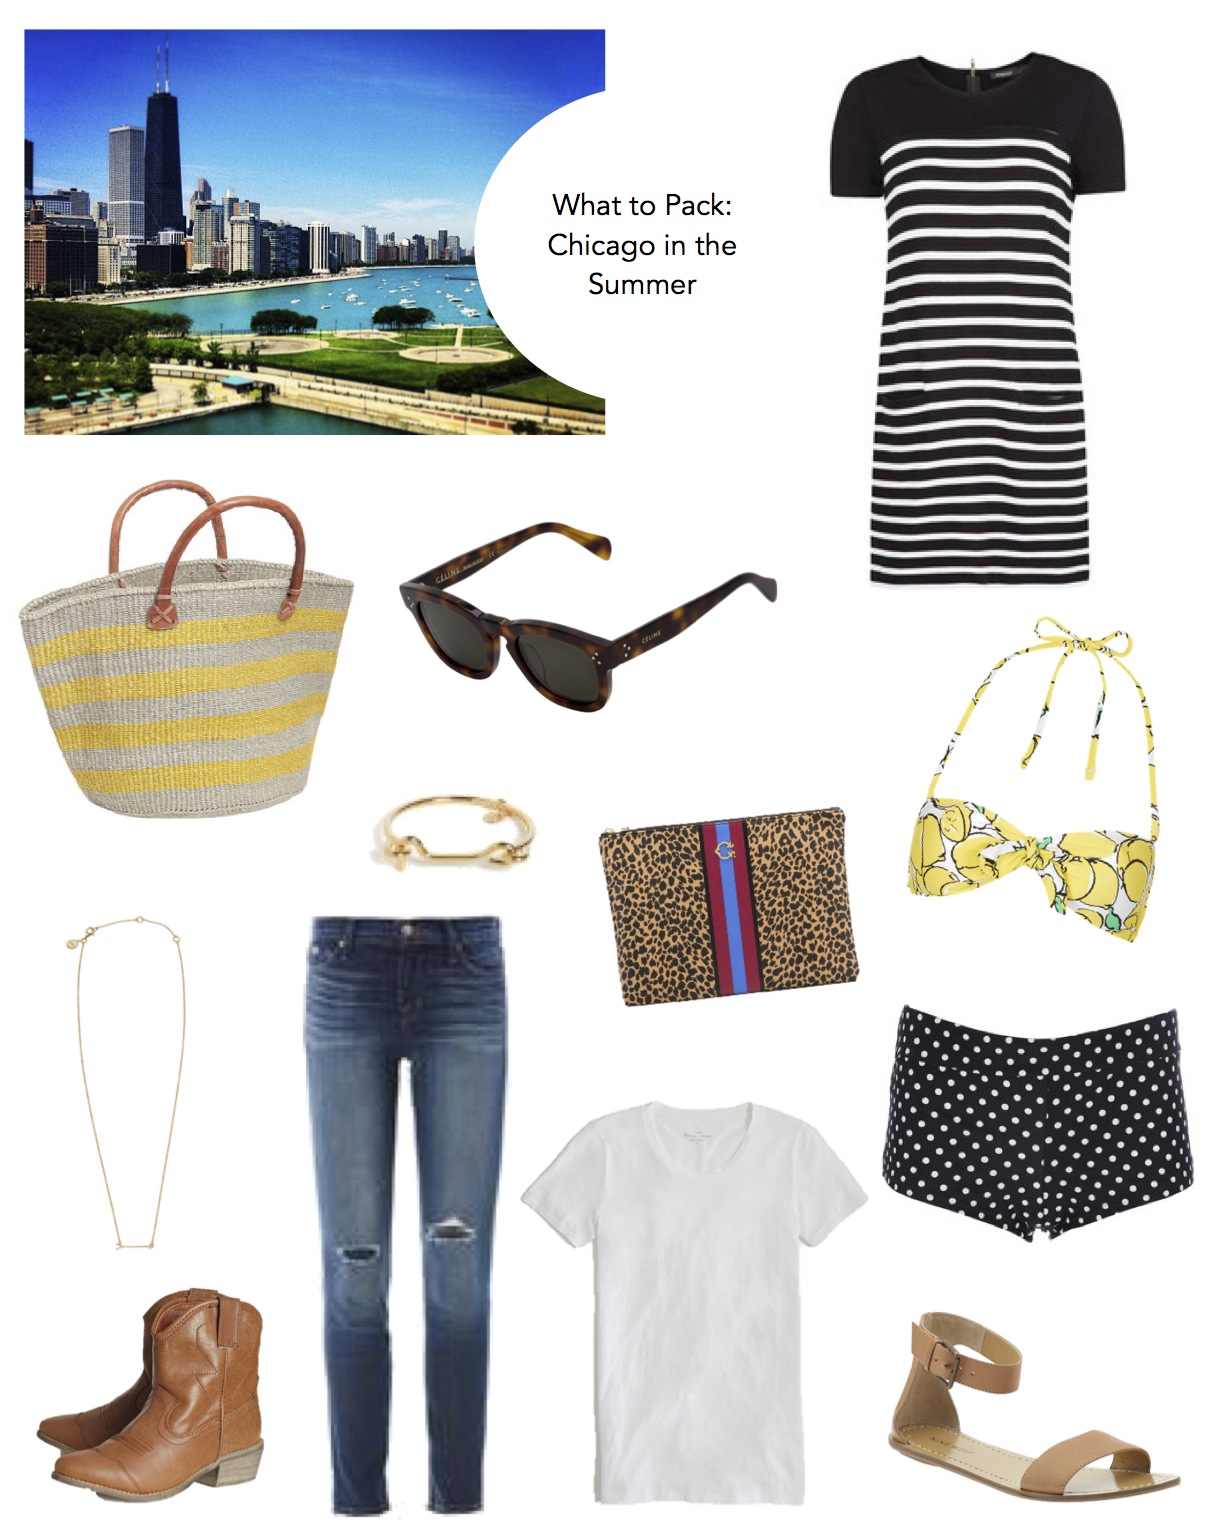 What to Pack: Chicago in the Summer